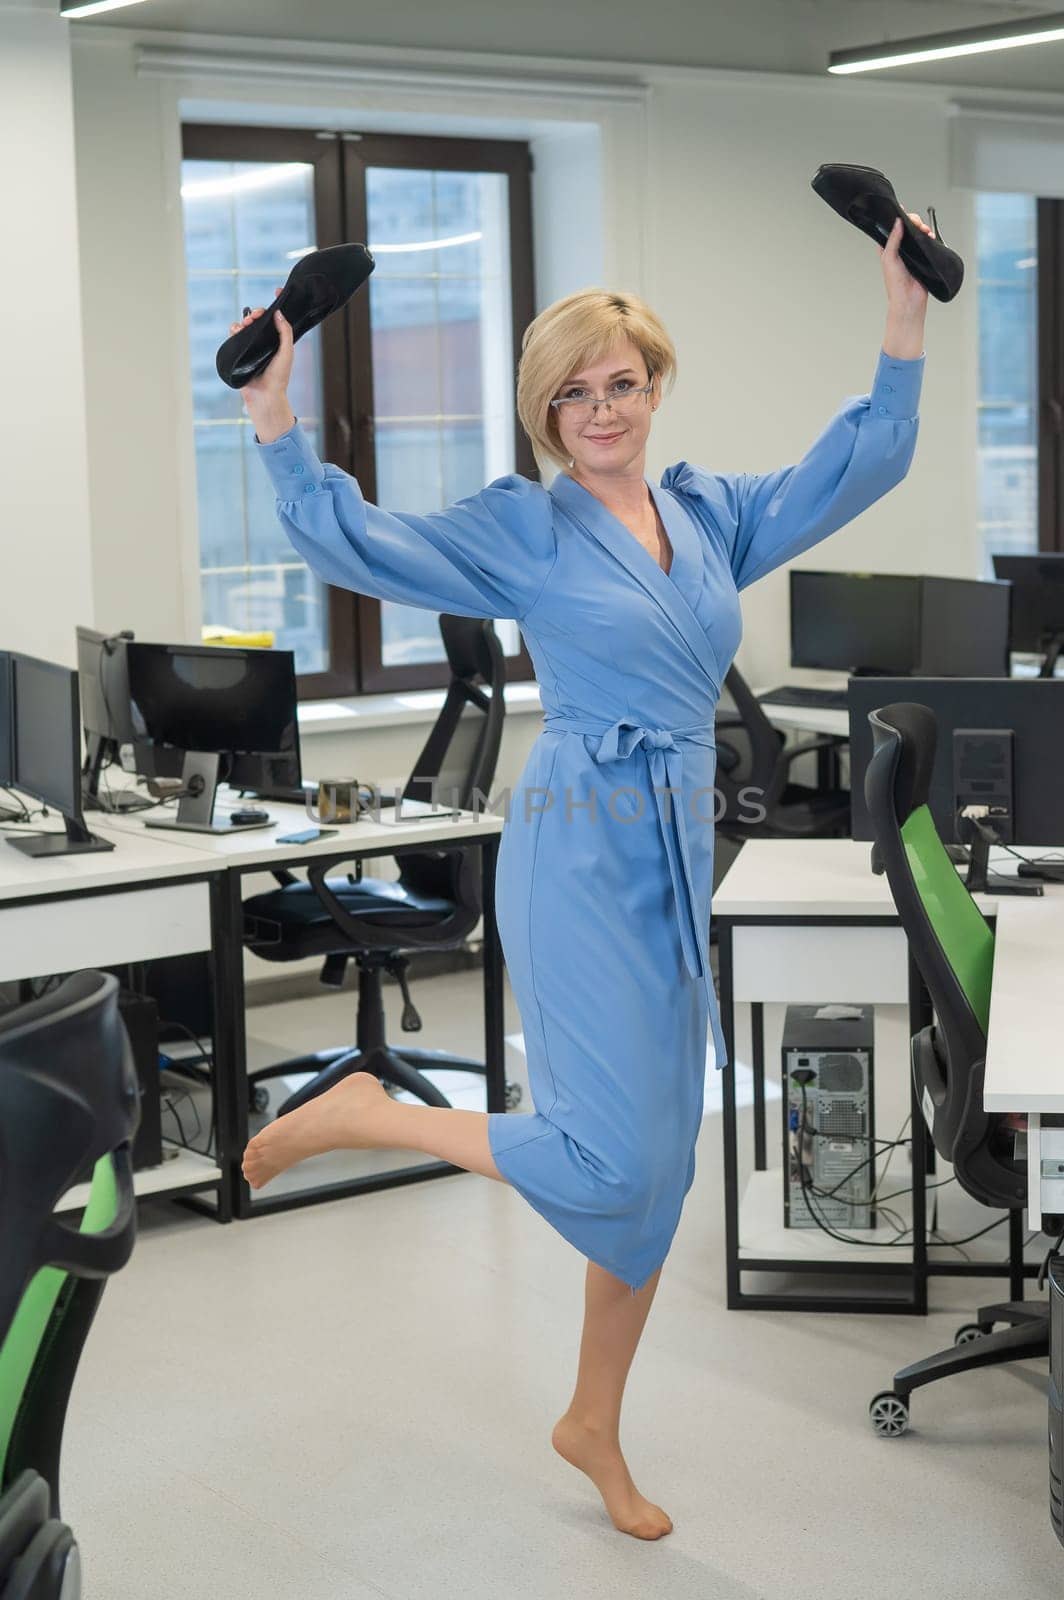 Caucasian business woman stands barefoot with shoes in her hands among the office